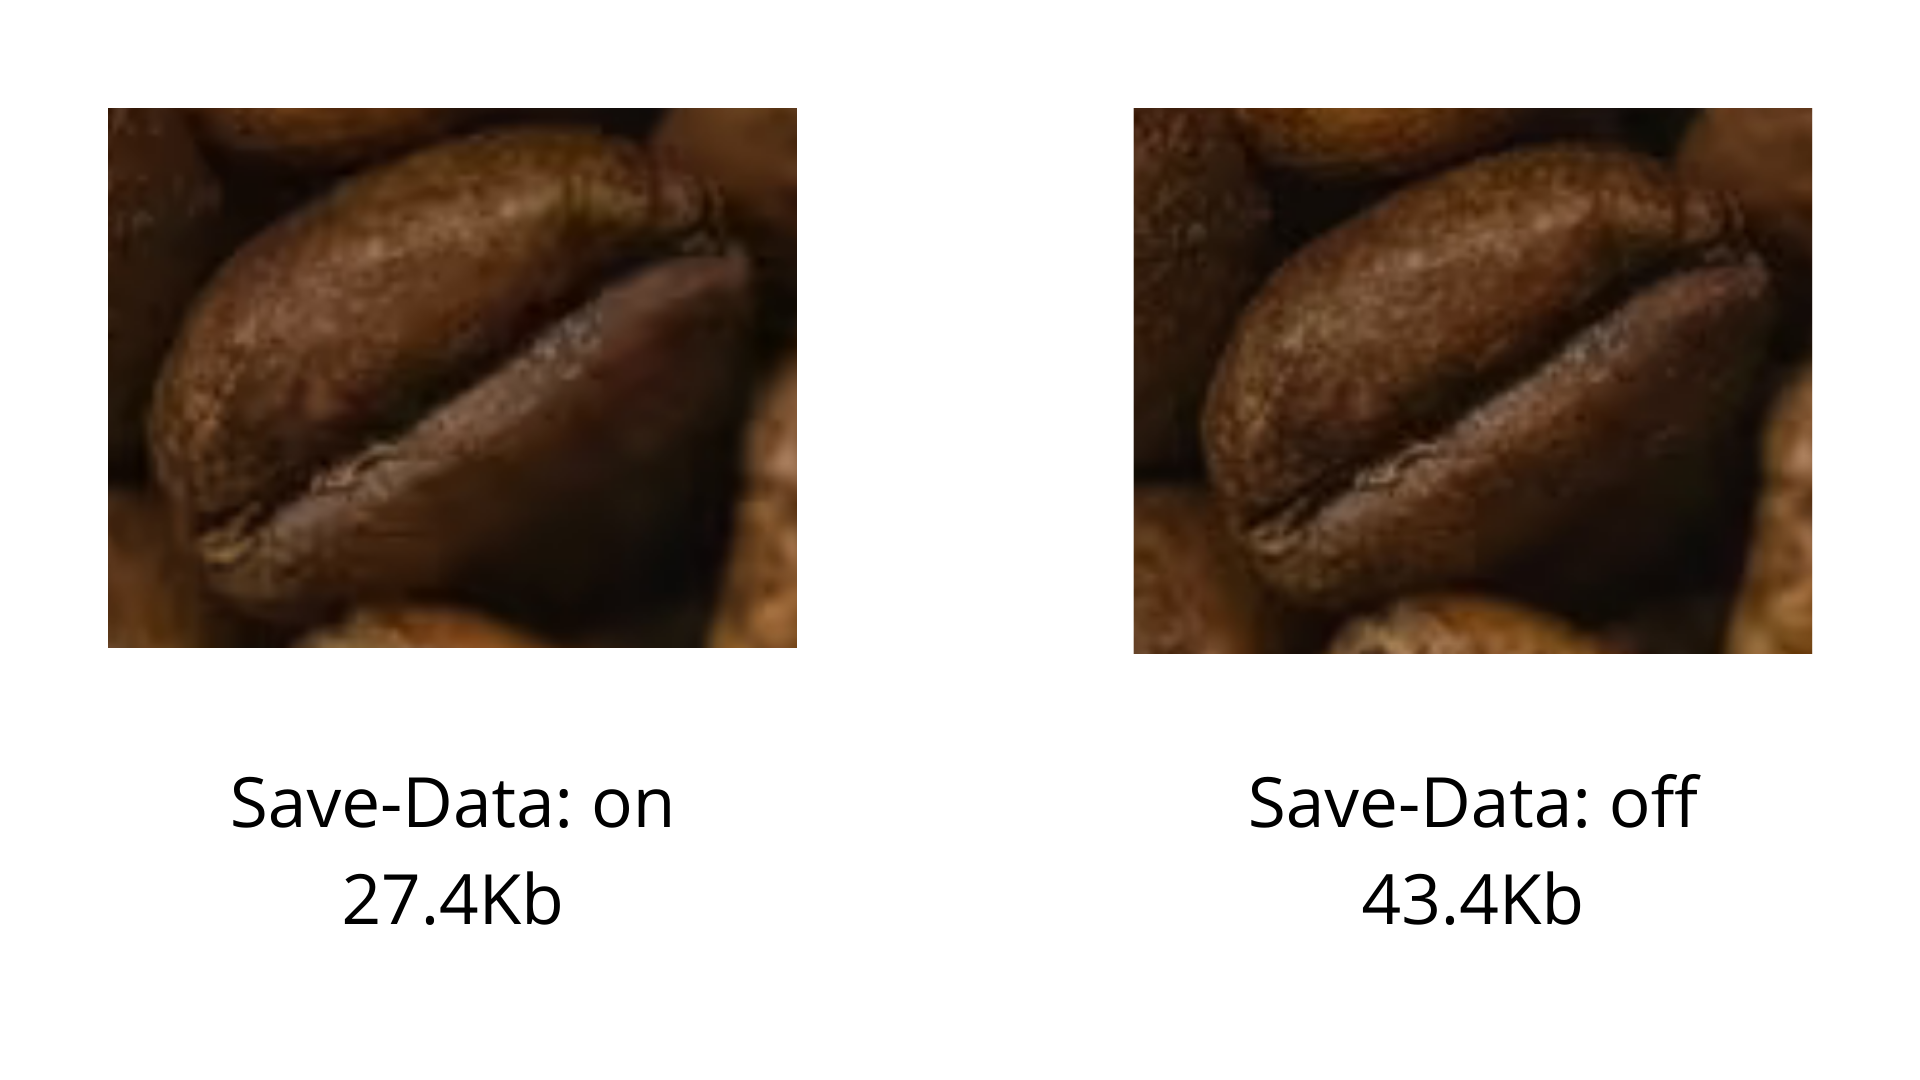 Compare images with and without save data